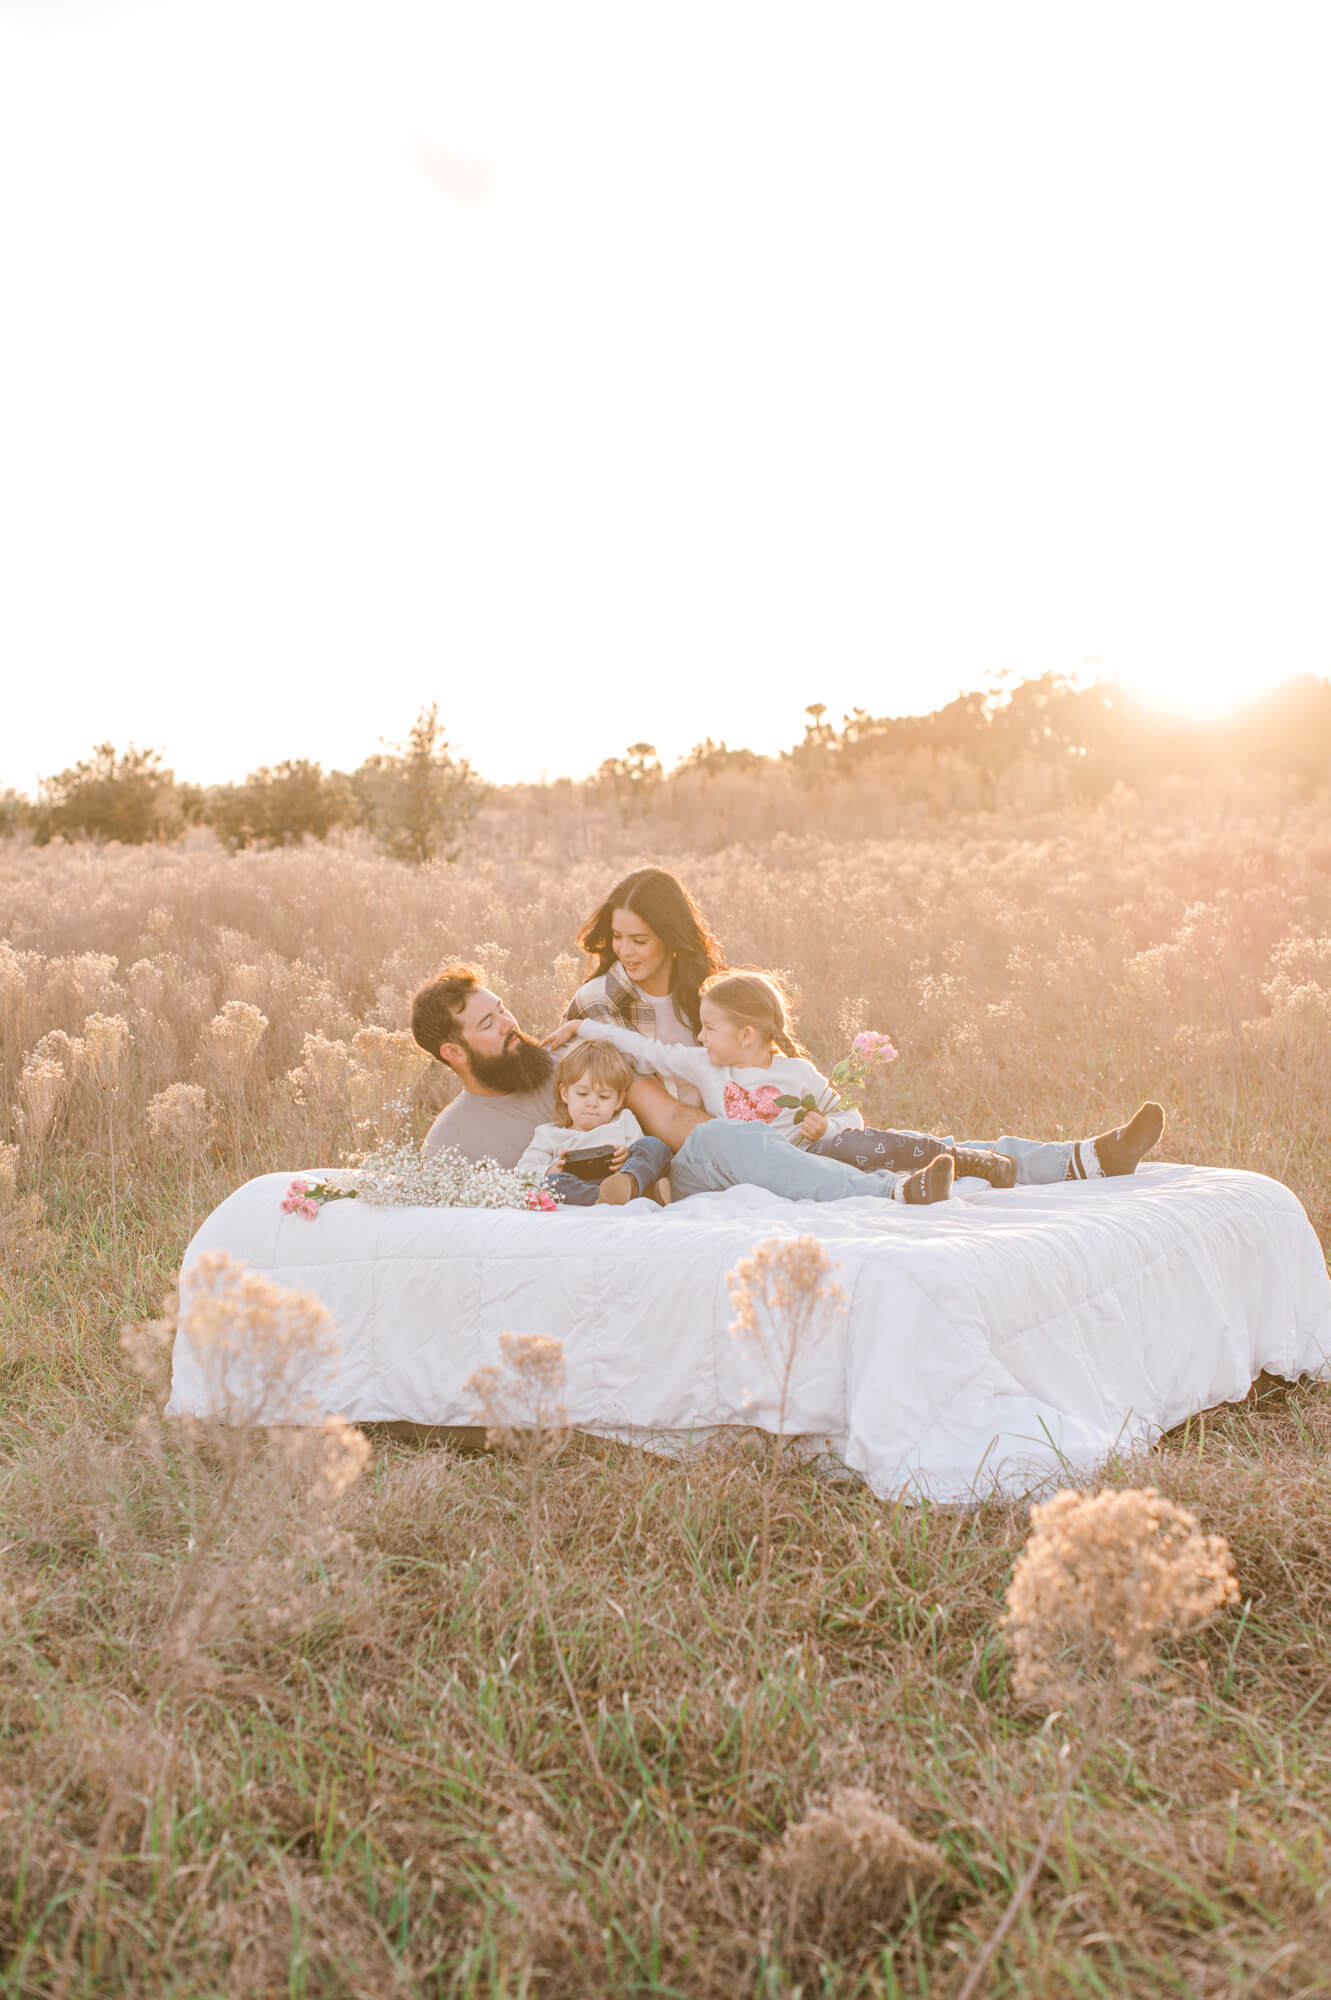 The sweetest family cuddled up at sunset on an air mattress in the middle of a cow field.